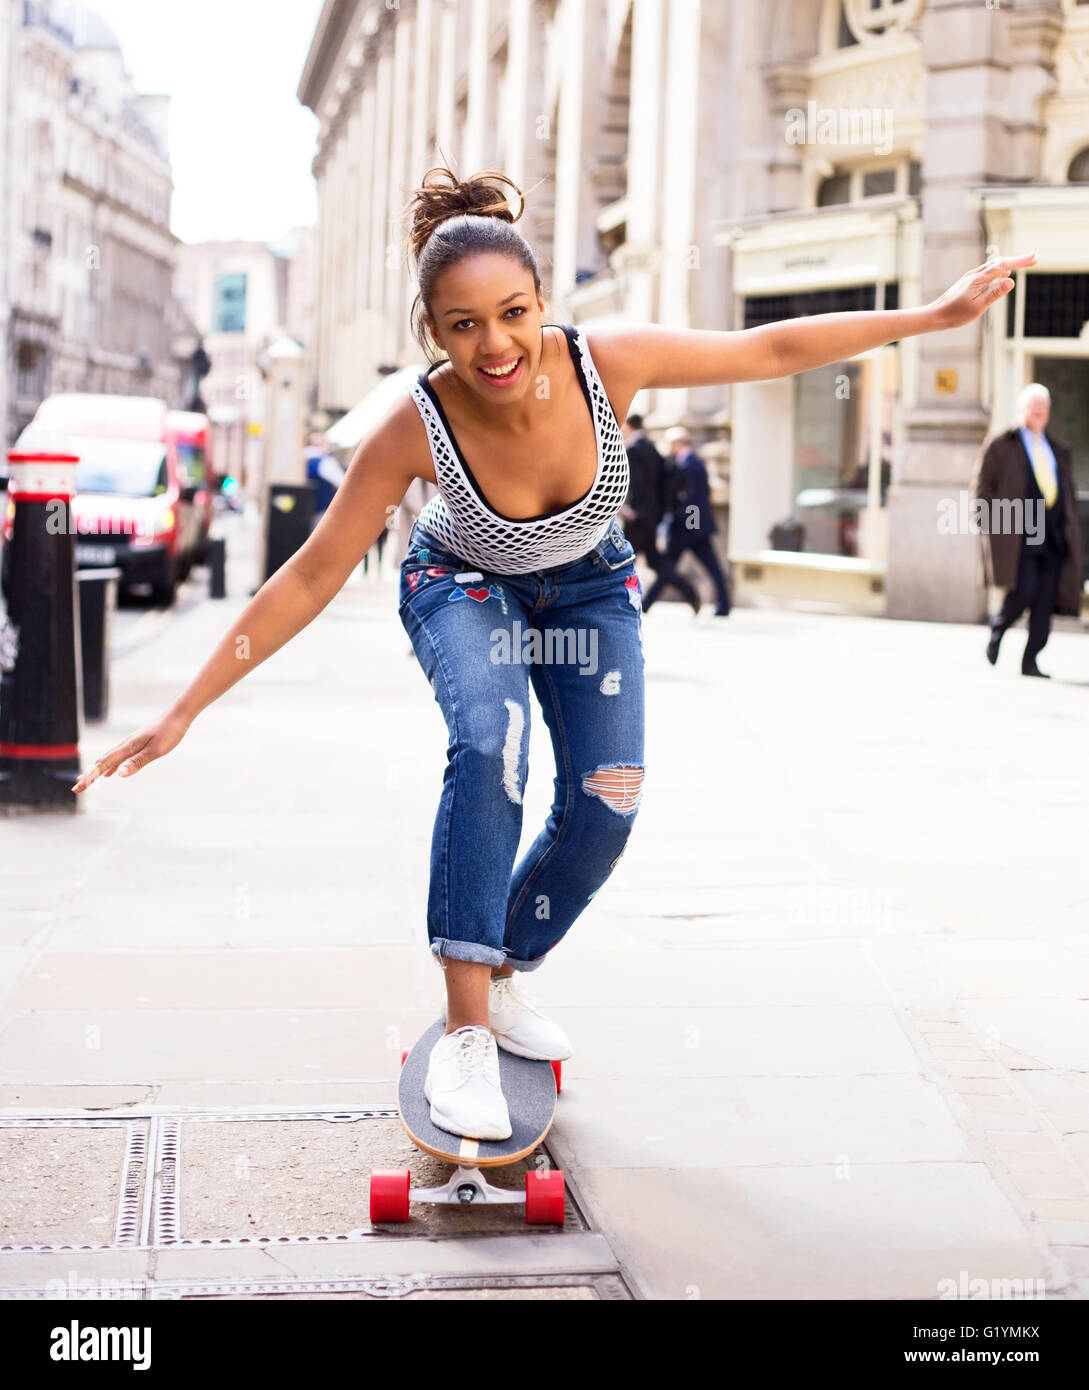 young woman skate boarding in the street Stock Photo